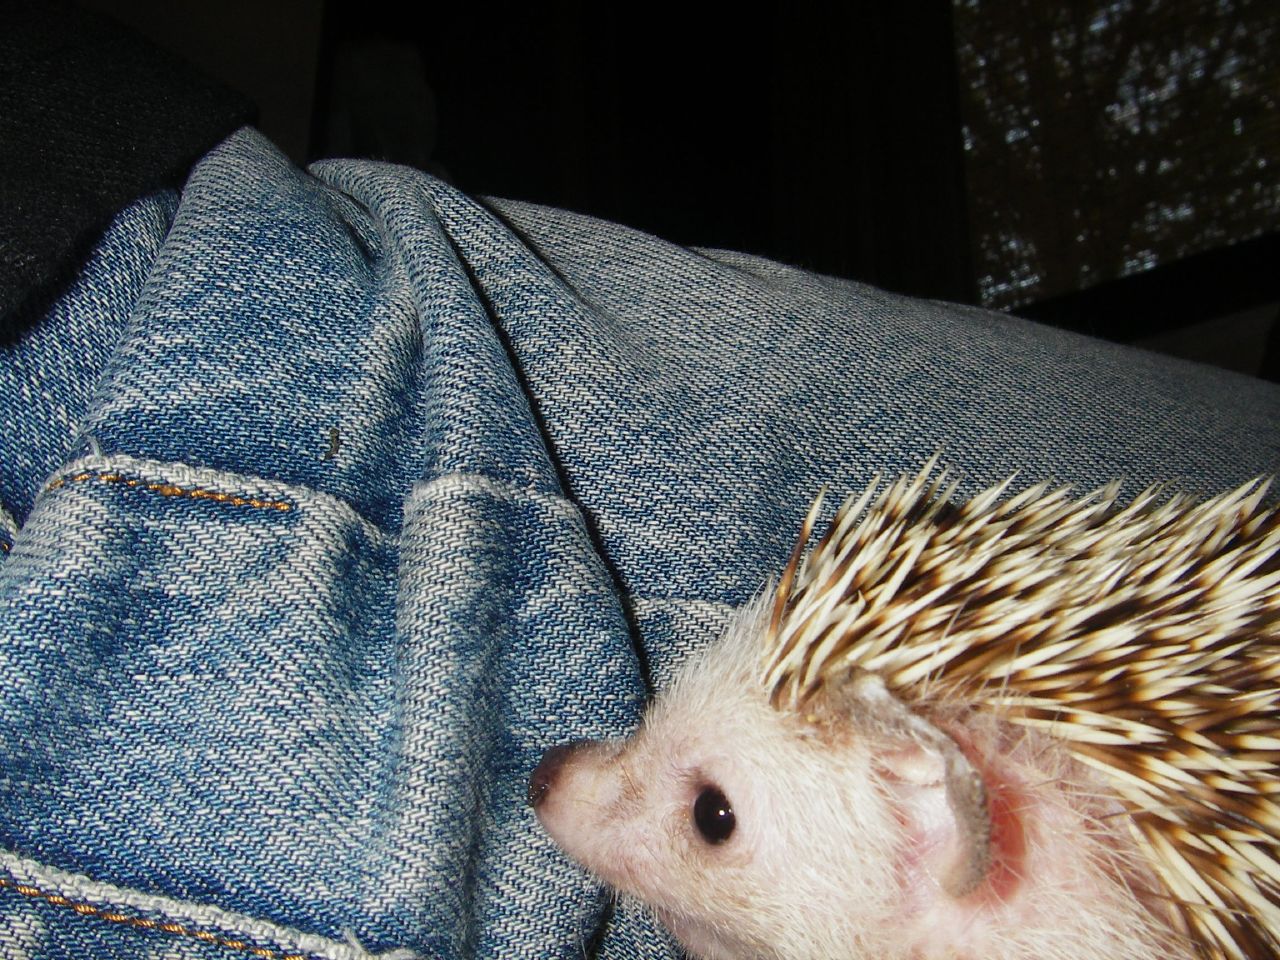 a hedgehog in someones jeans has his head on the back leg